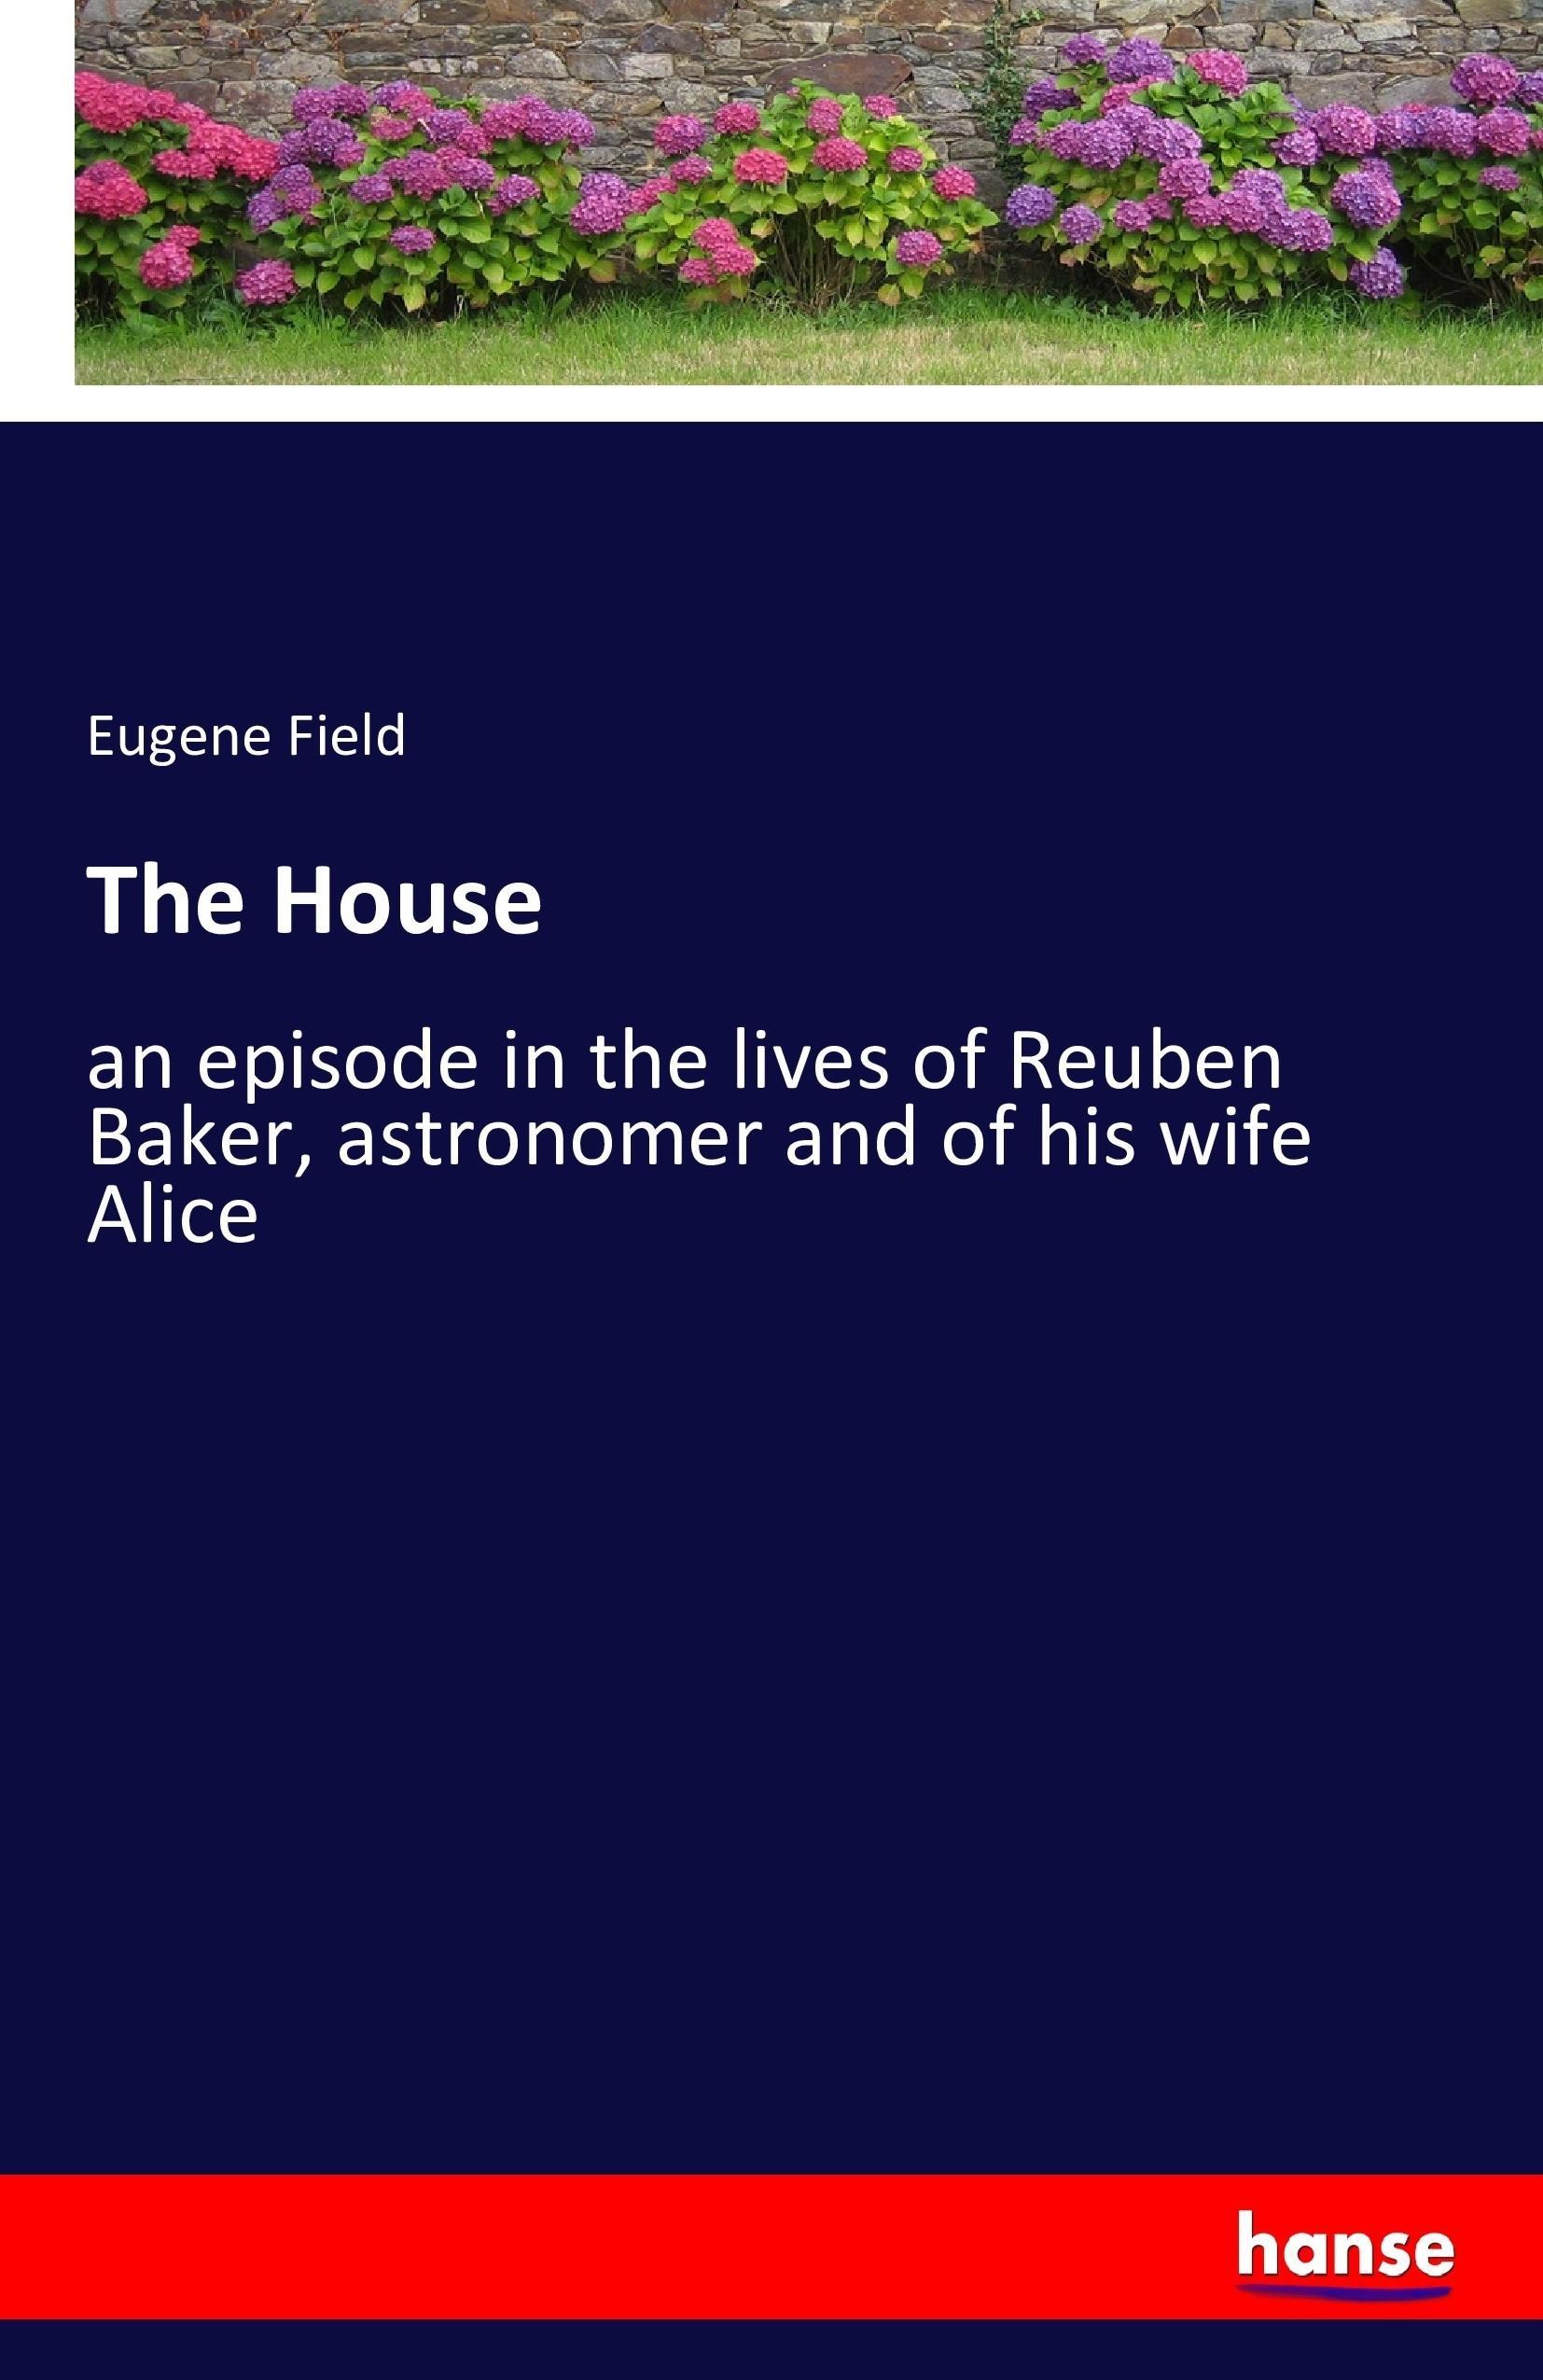 The House / an episode in the lives of Reuben Baker, astronomer and of his wife Alice / Eugene Field / Taschenbuch / Paperback / 276 S. / Englisch / 2016 / hansebooks / EAN 9783742894366 - Field, Eugene